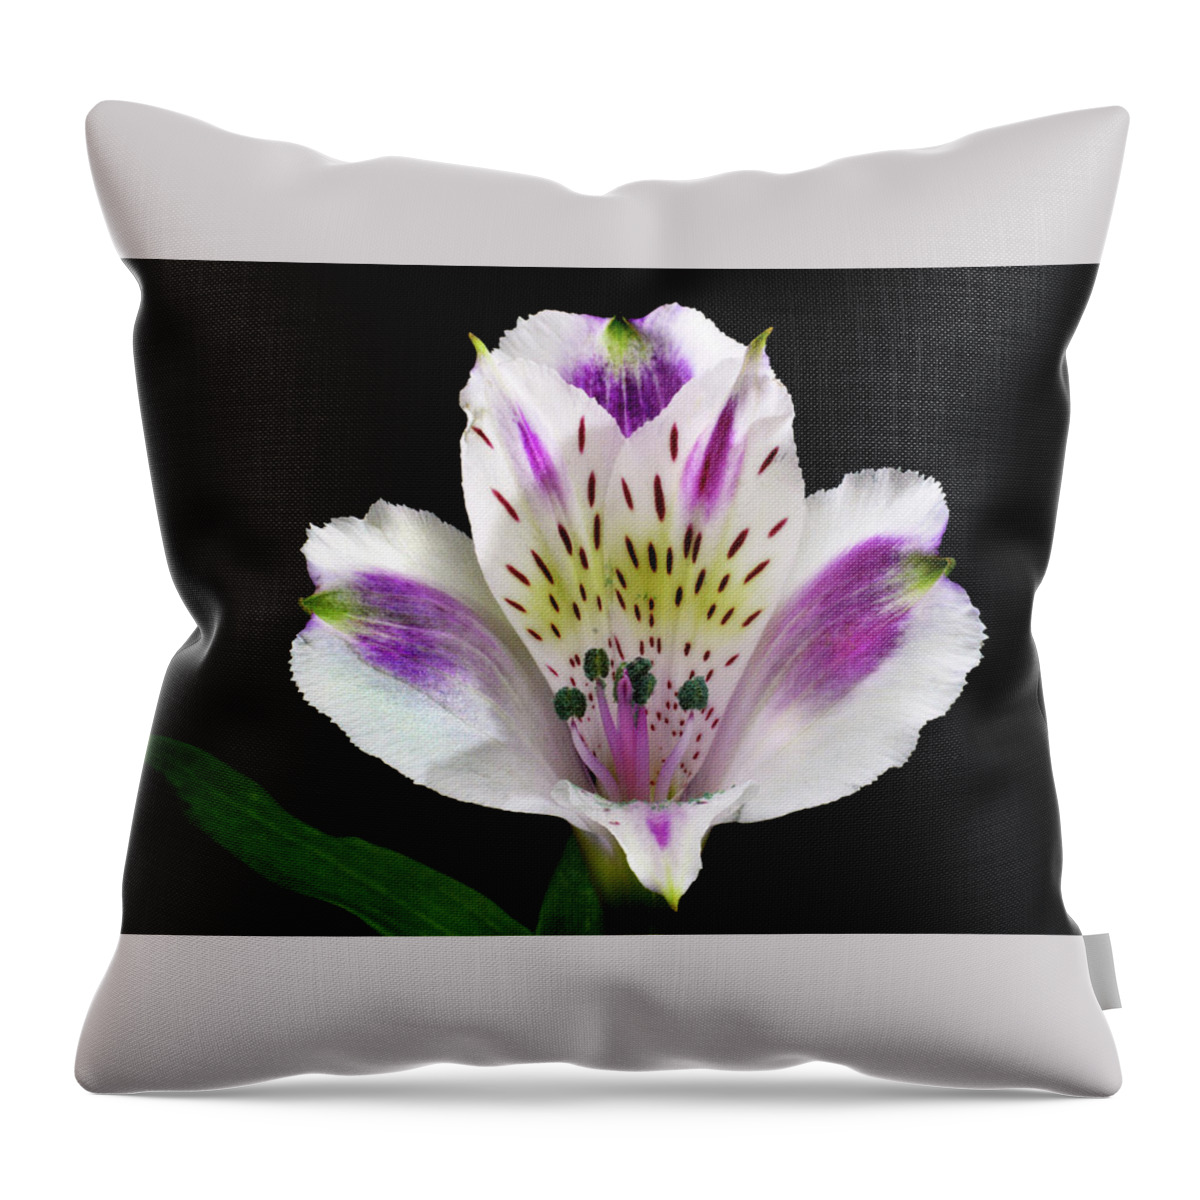 Peruvian Lily Throw Pillow featuring the photograph Alstroemeria Portrait. by Terence Davis